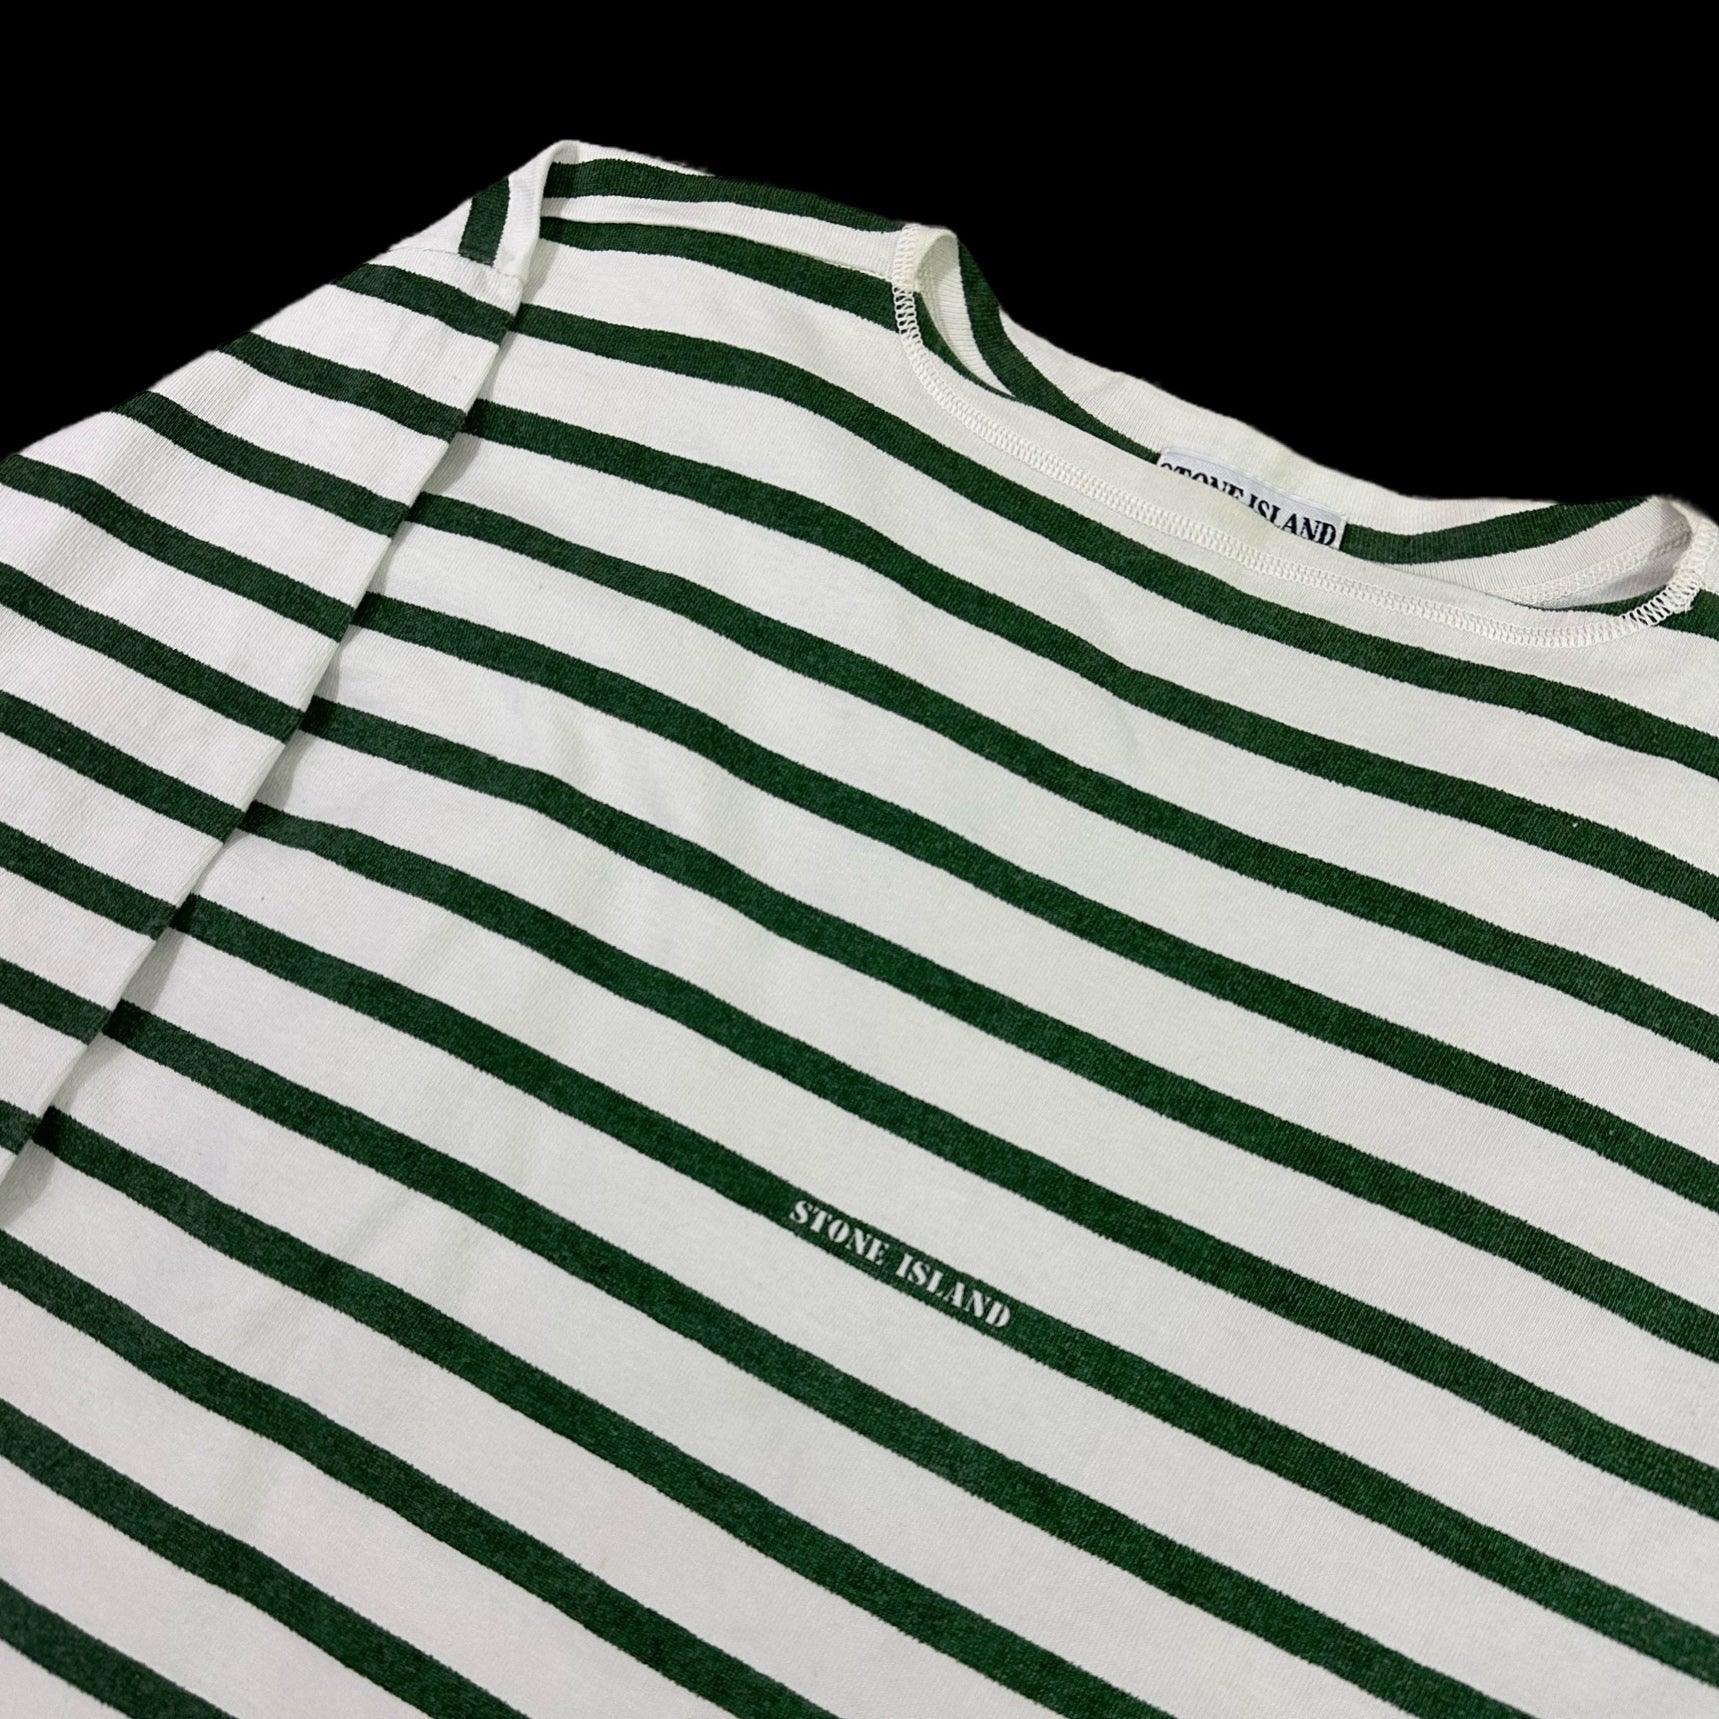 Stone Island Long Sleeved Striped T Shirt from late 80’s - Known Source